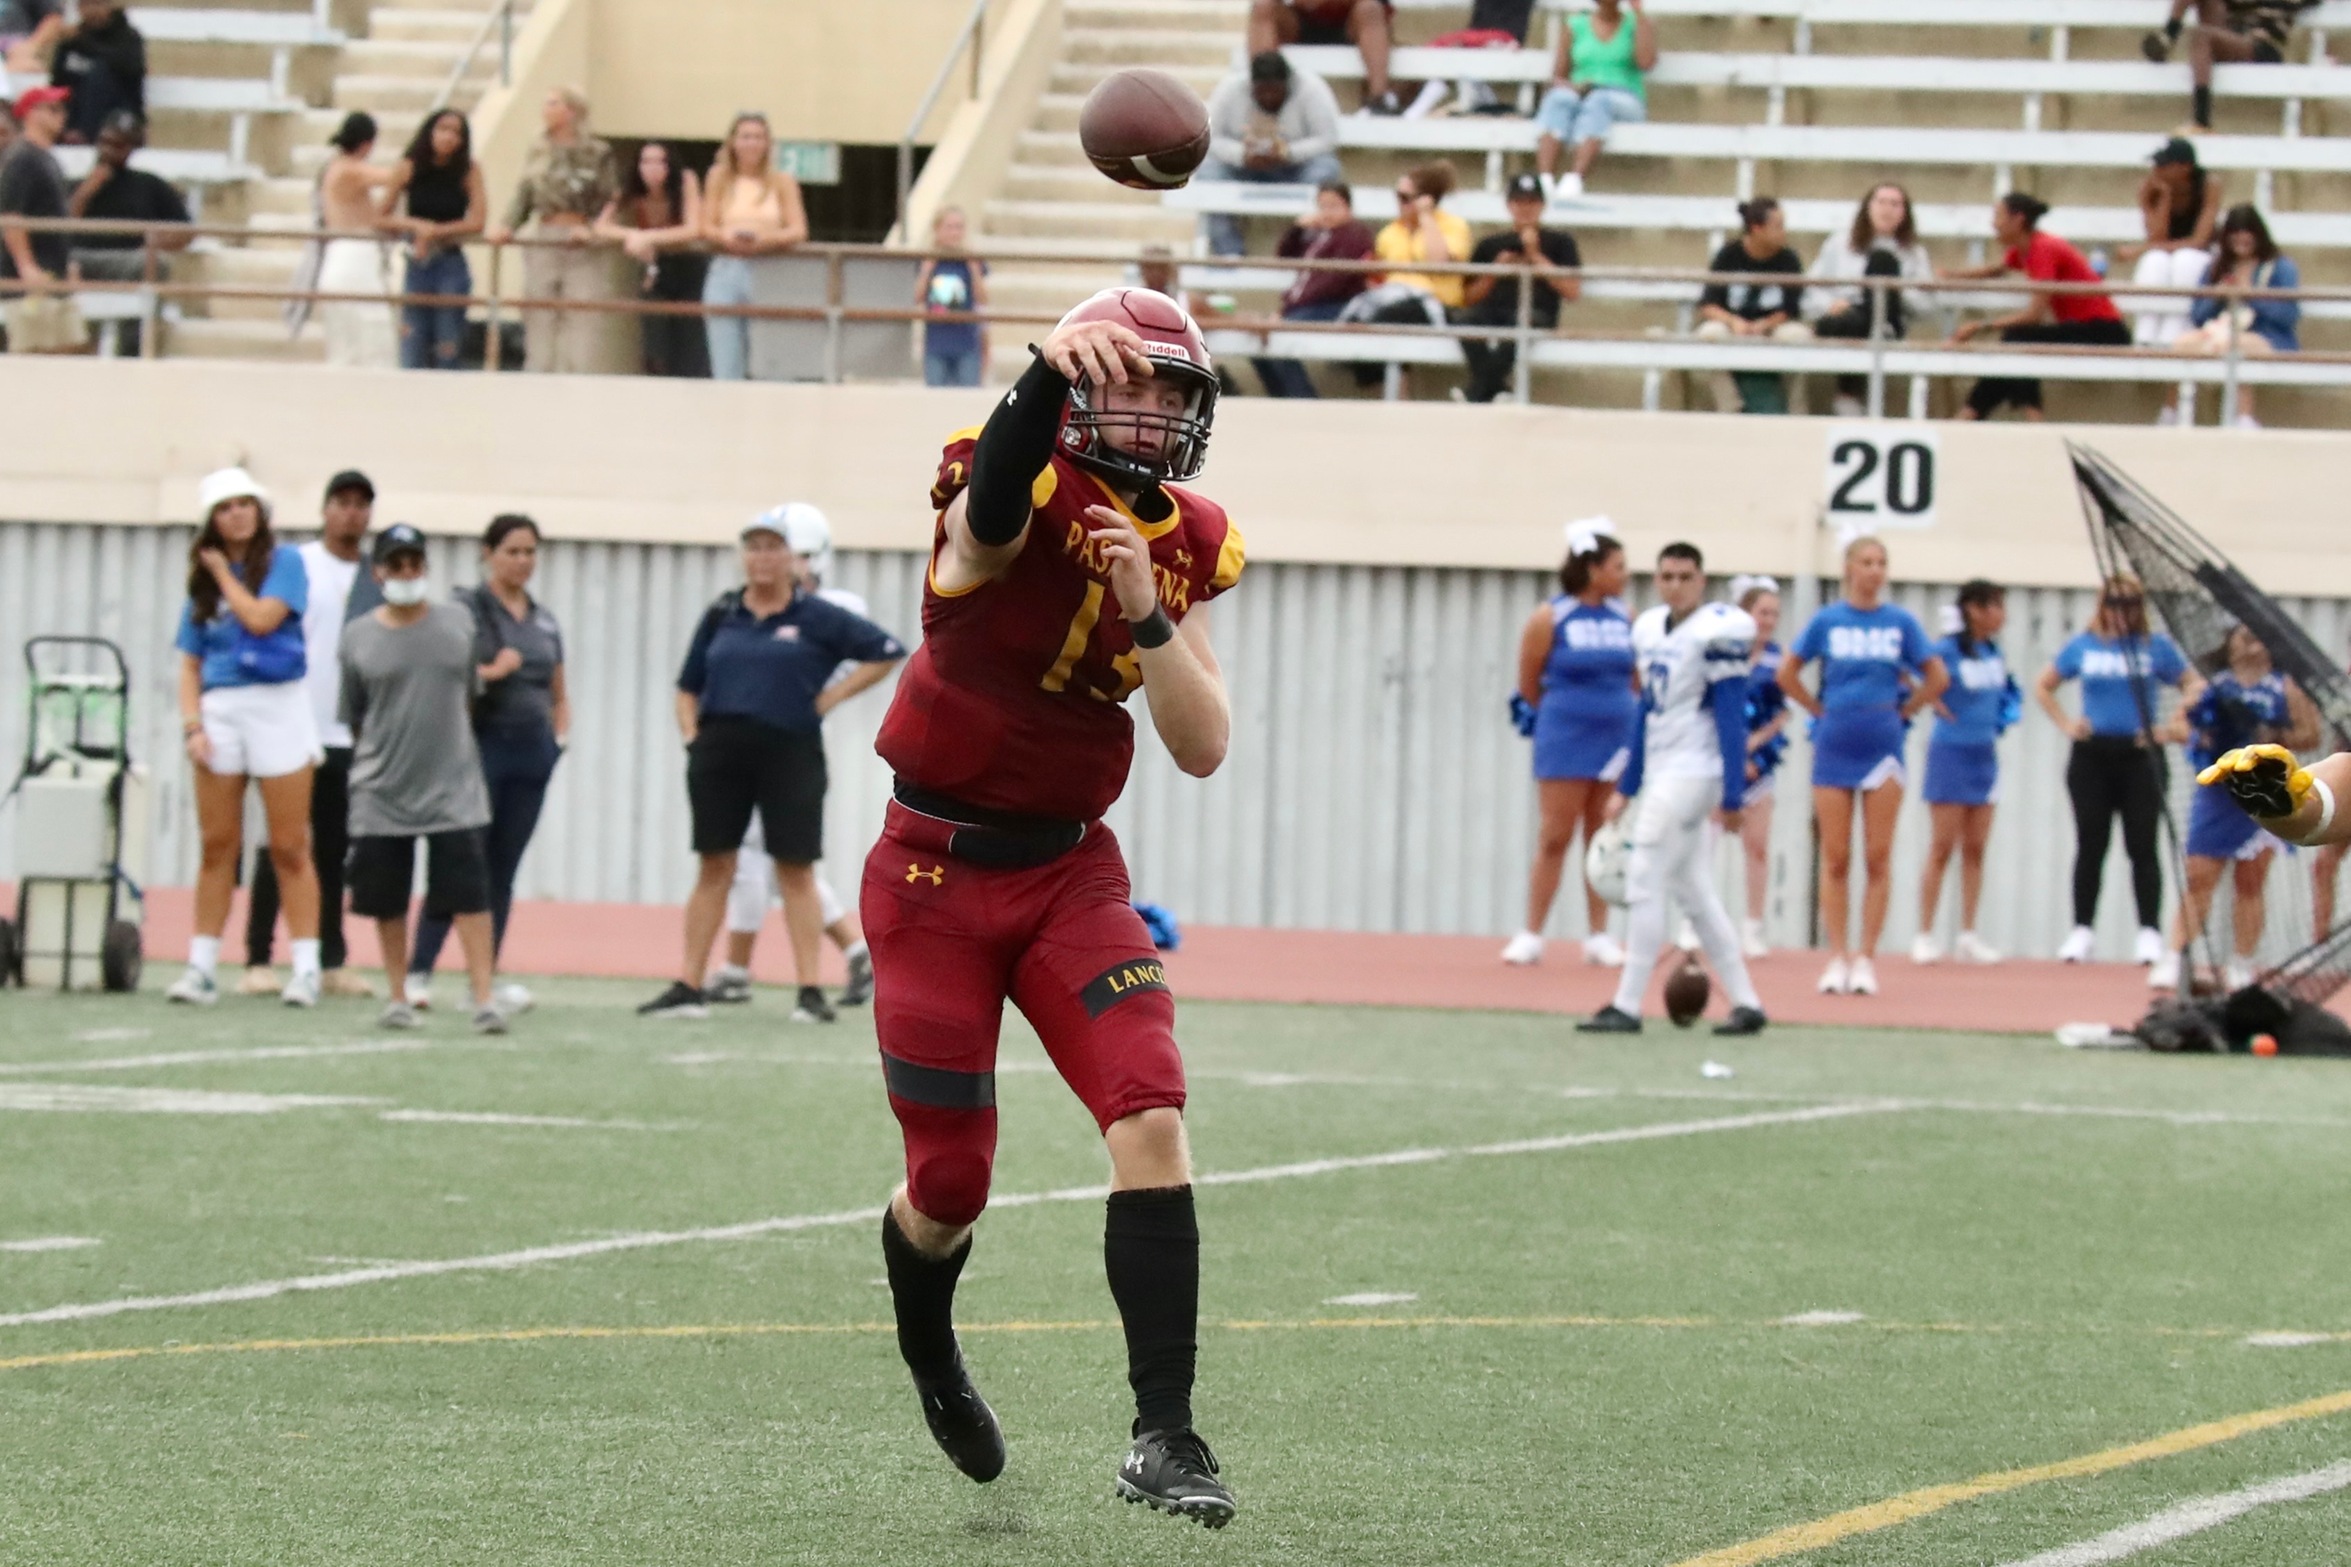 QB Jakob Doolittle passes for a 2-point conversion during the Lancers' 27-20 win at SMC on Saturday (photo by Michael Watkins).